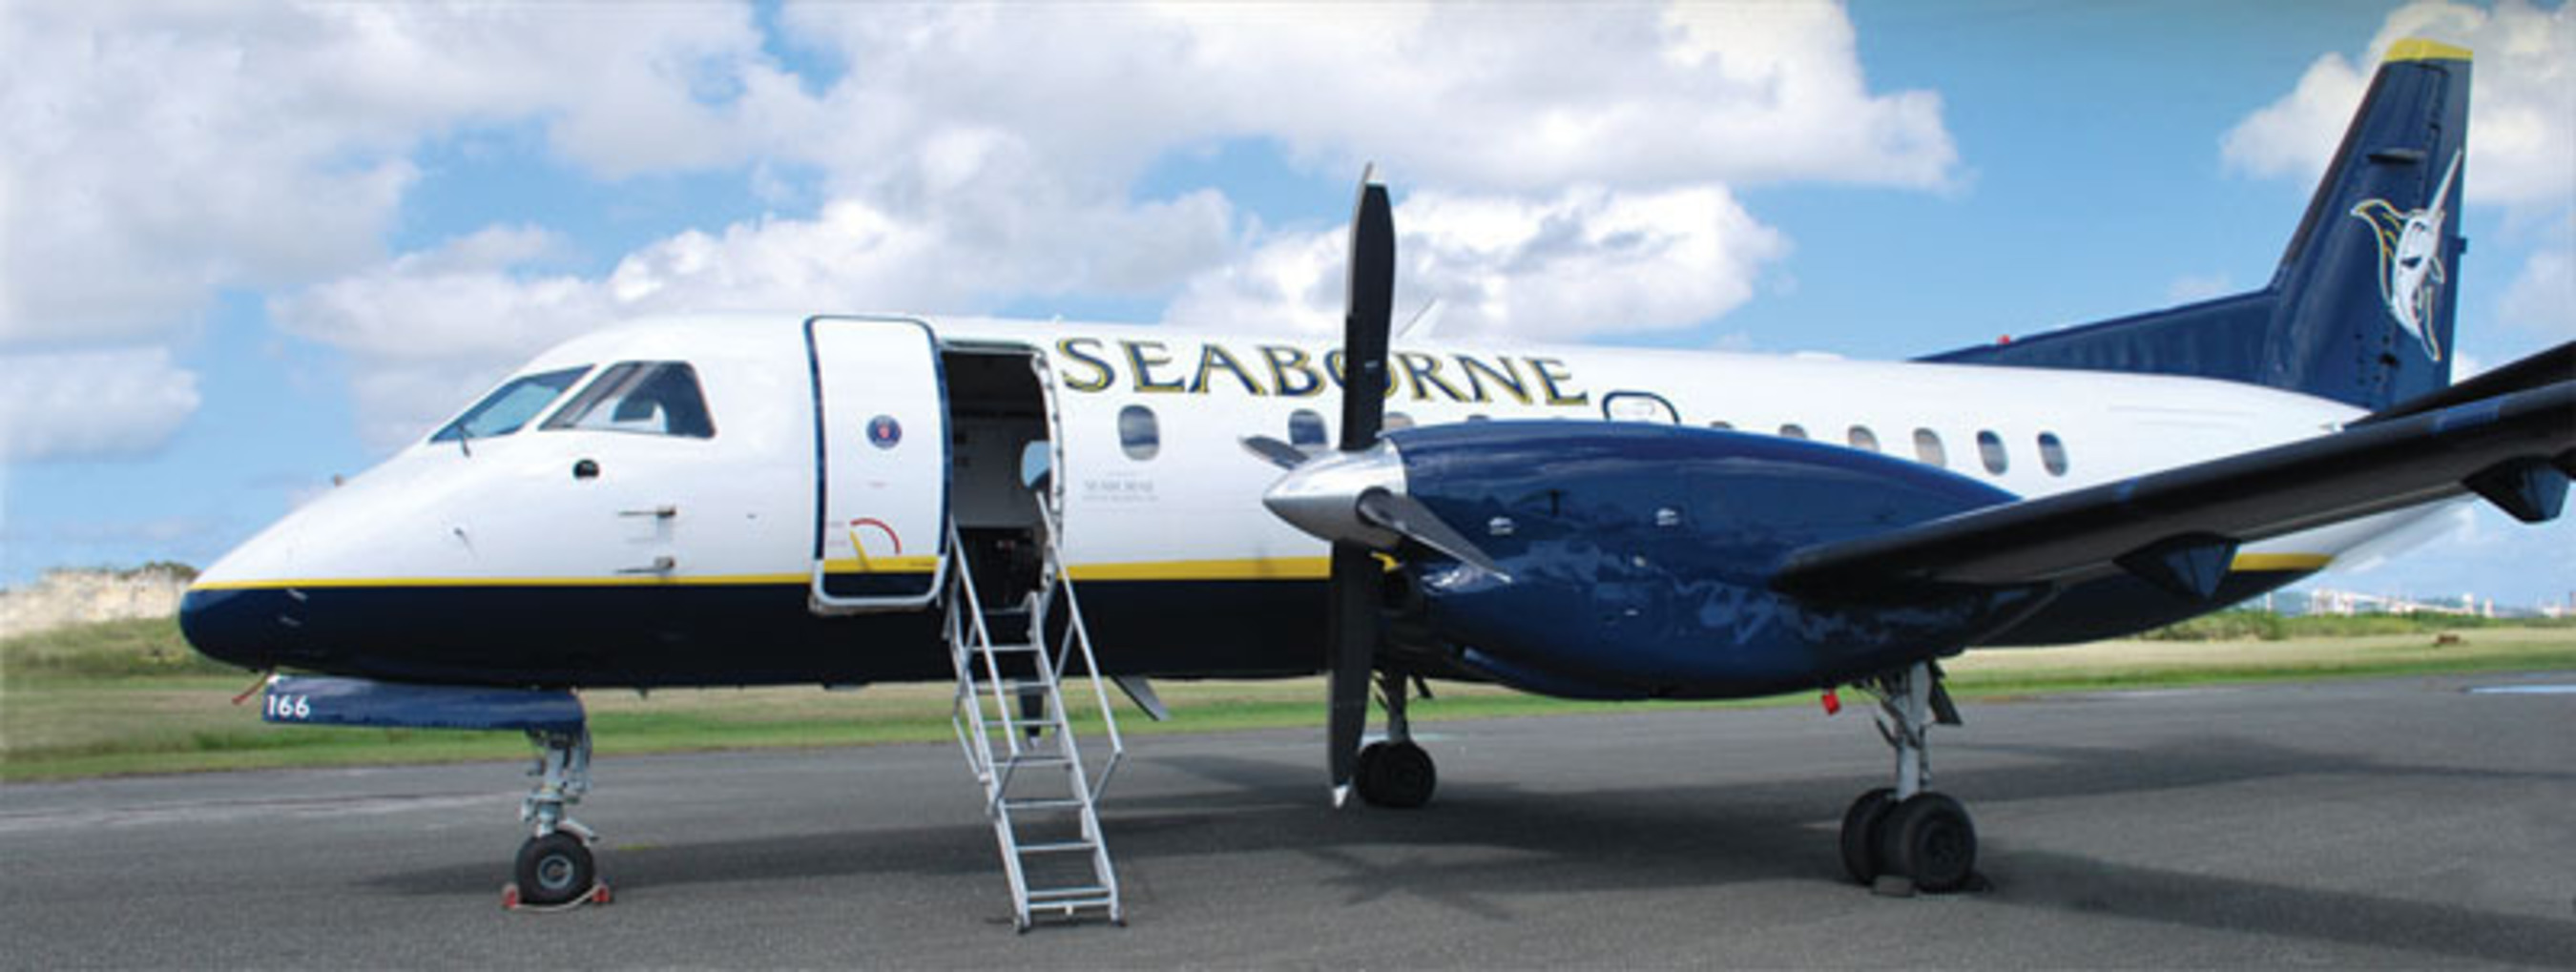 With the new San Juan - St. Kitts and Nevis route, Seaborne Airlines also announced the addition of four more 34-seat Saab aircraft in the first half of 2014. (PRNewsFoto/Seaborne Airlines) (PRNewsFoto/SEABORNE AIRLINES)